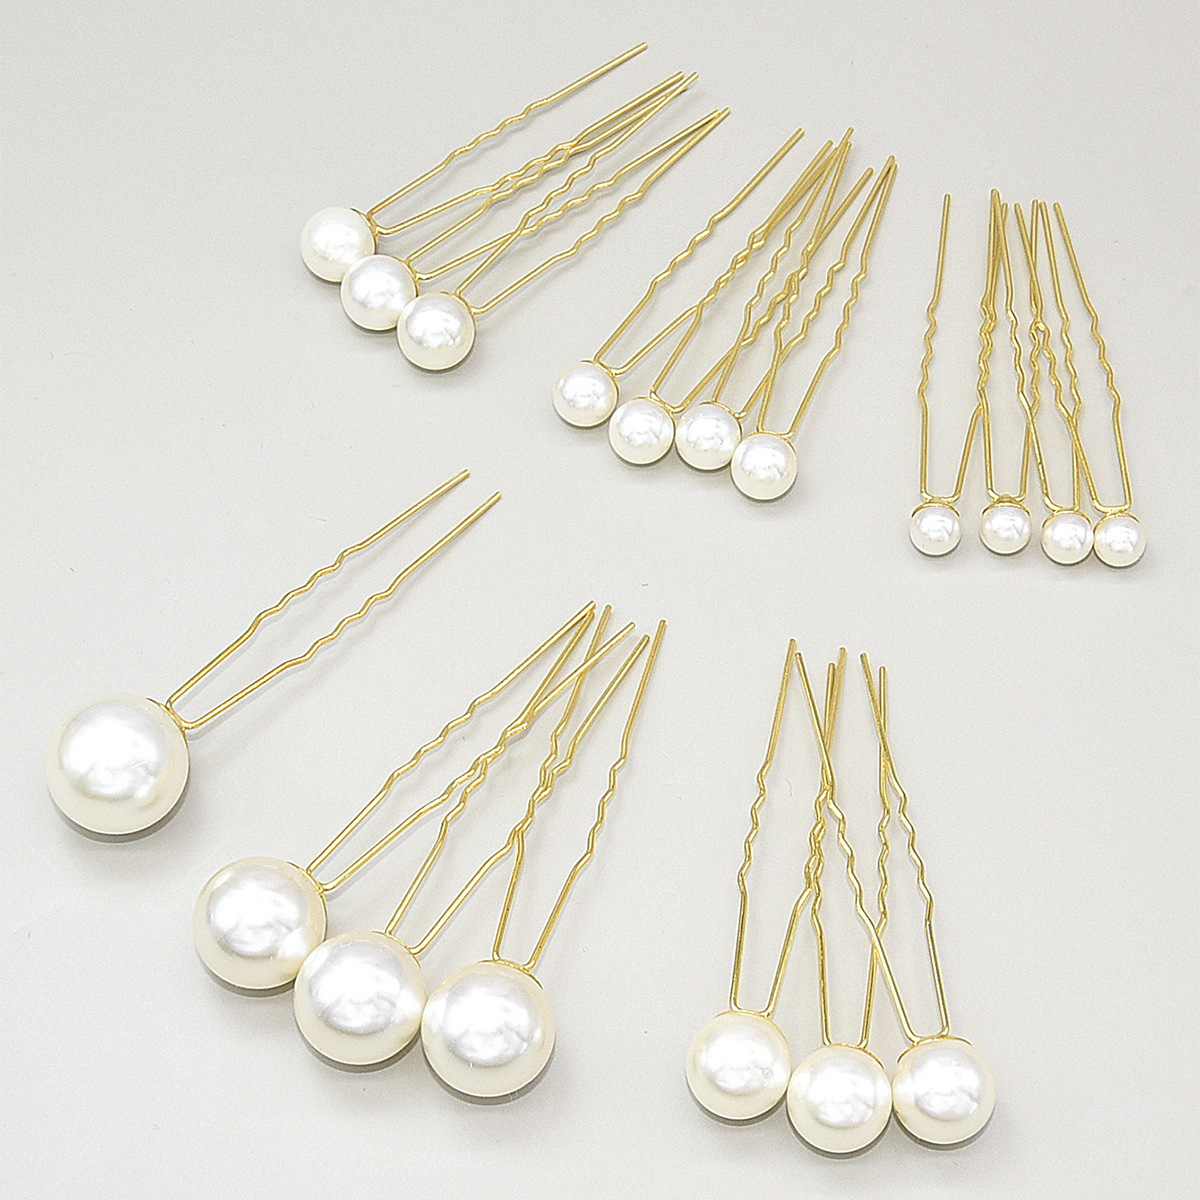 2020 Bridal Headdress 18 Pieces Pearl Hairpin Hair Accessories European and American Retro Makeup Updo Flower Beads U-Shaped Hairpin Accessories